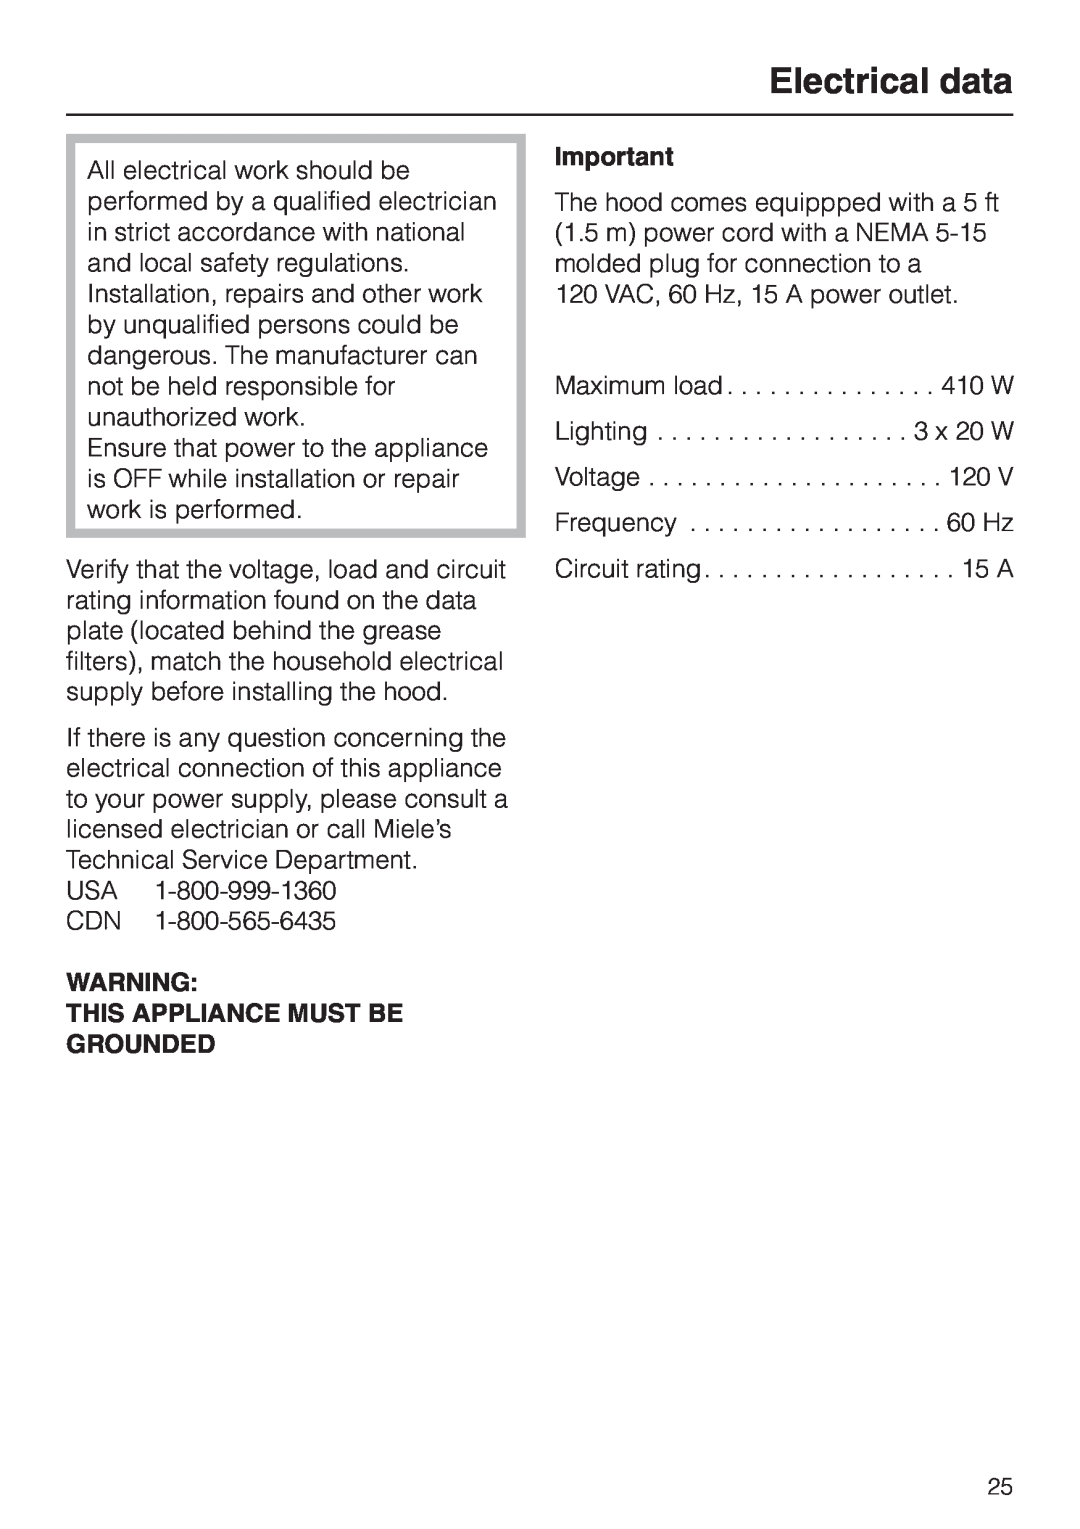 Miele DA239-3 installation instructions Electrical data, This Appliance Must Be Grounded 